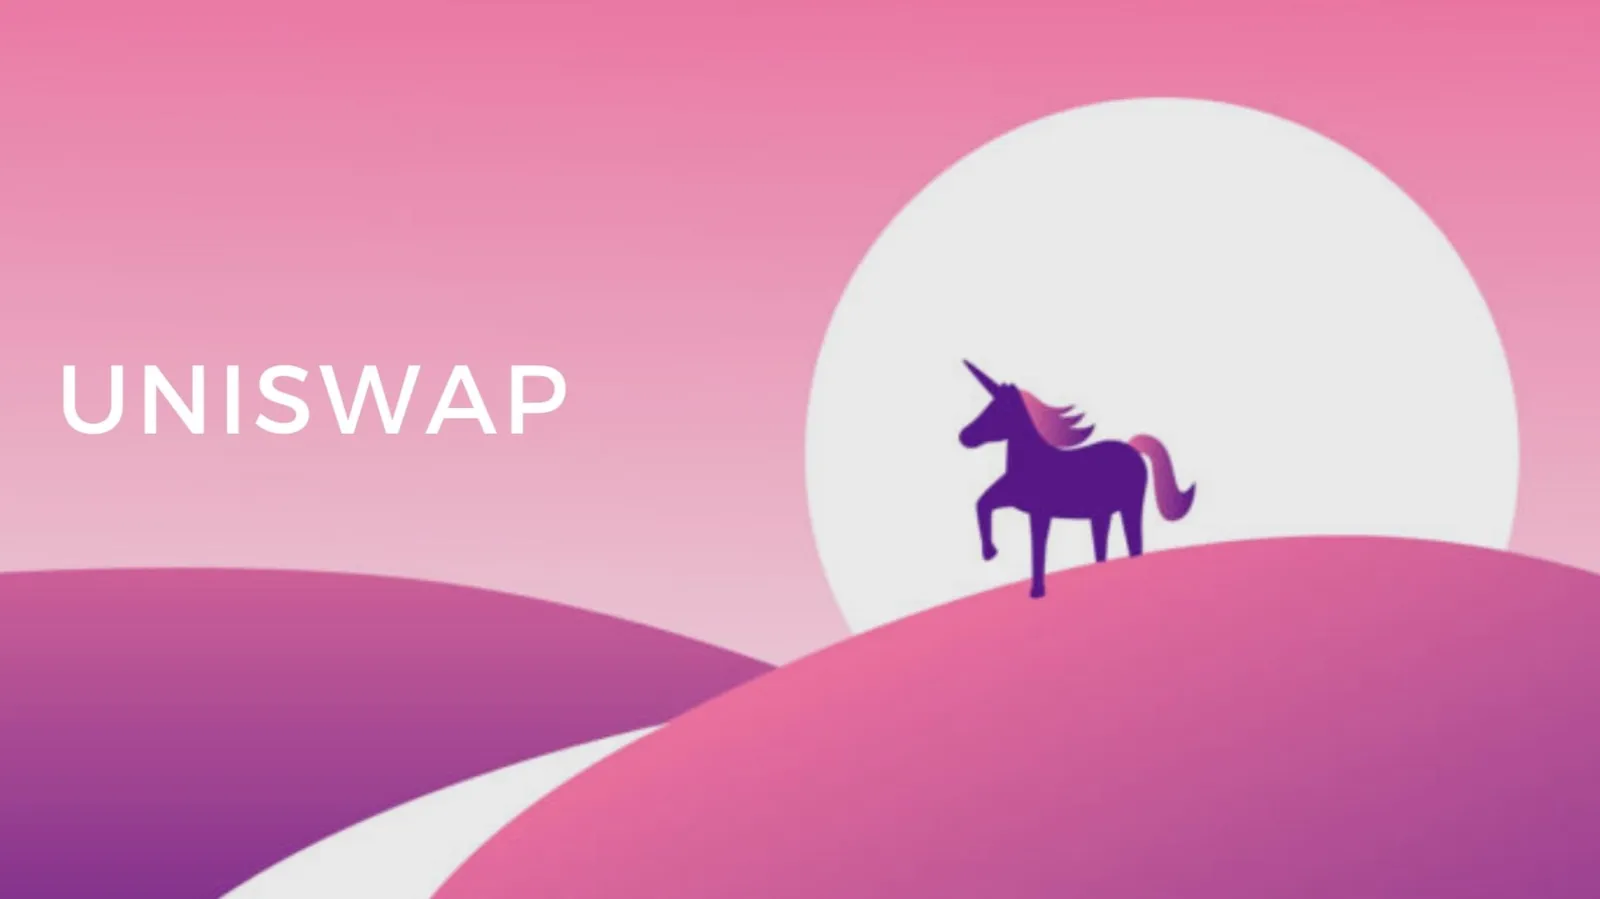 What is Uniswap? Why was it a revolution?